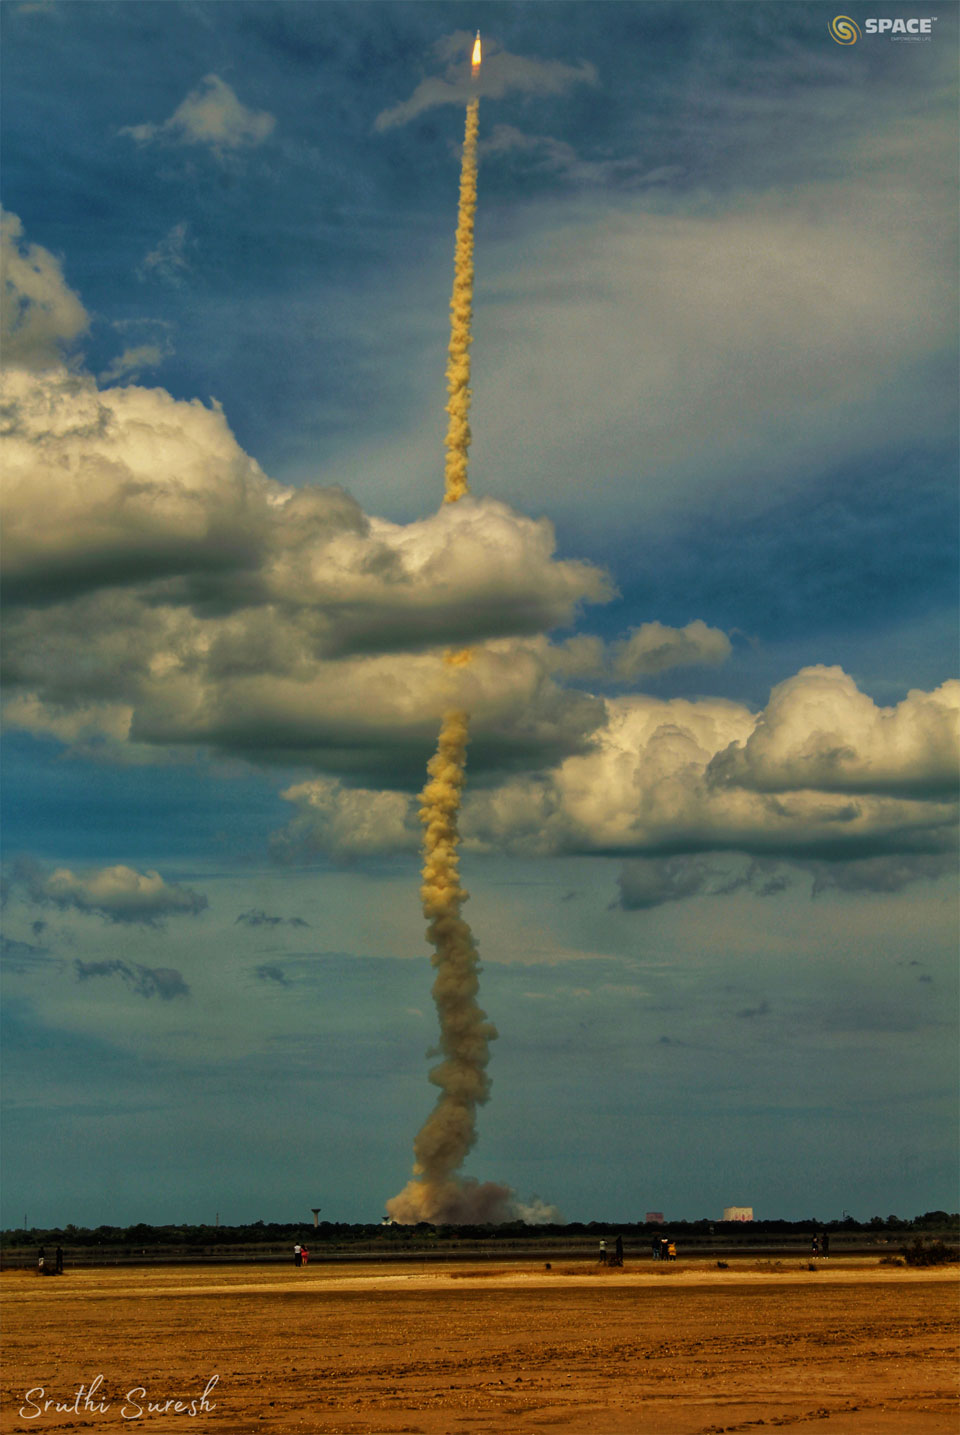 A rocket is seen after lift-off with a long smoke plume.
The rocket is captured against a blue sky and has gone through
a cloud deck. In the foreground is an empty tan-colored field. 
Please see the explanation for more detailed information.